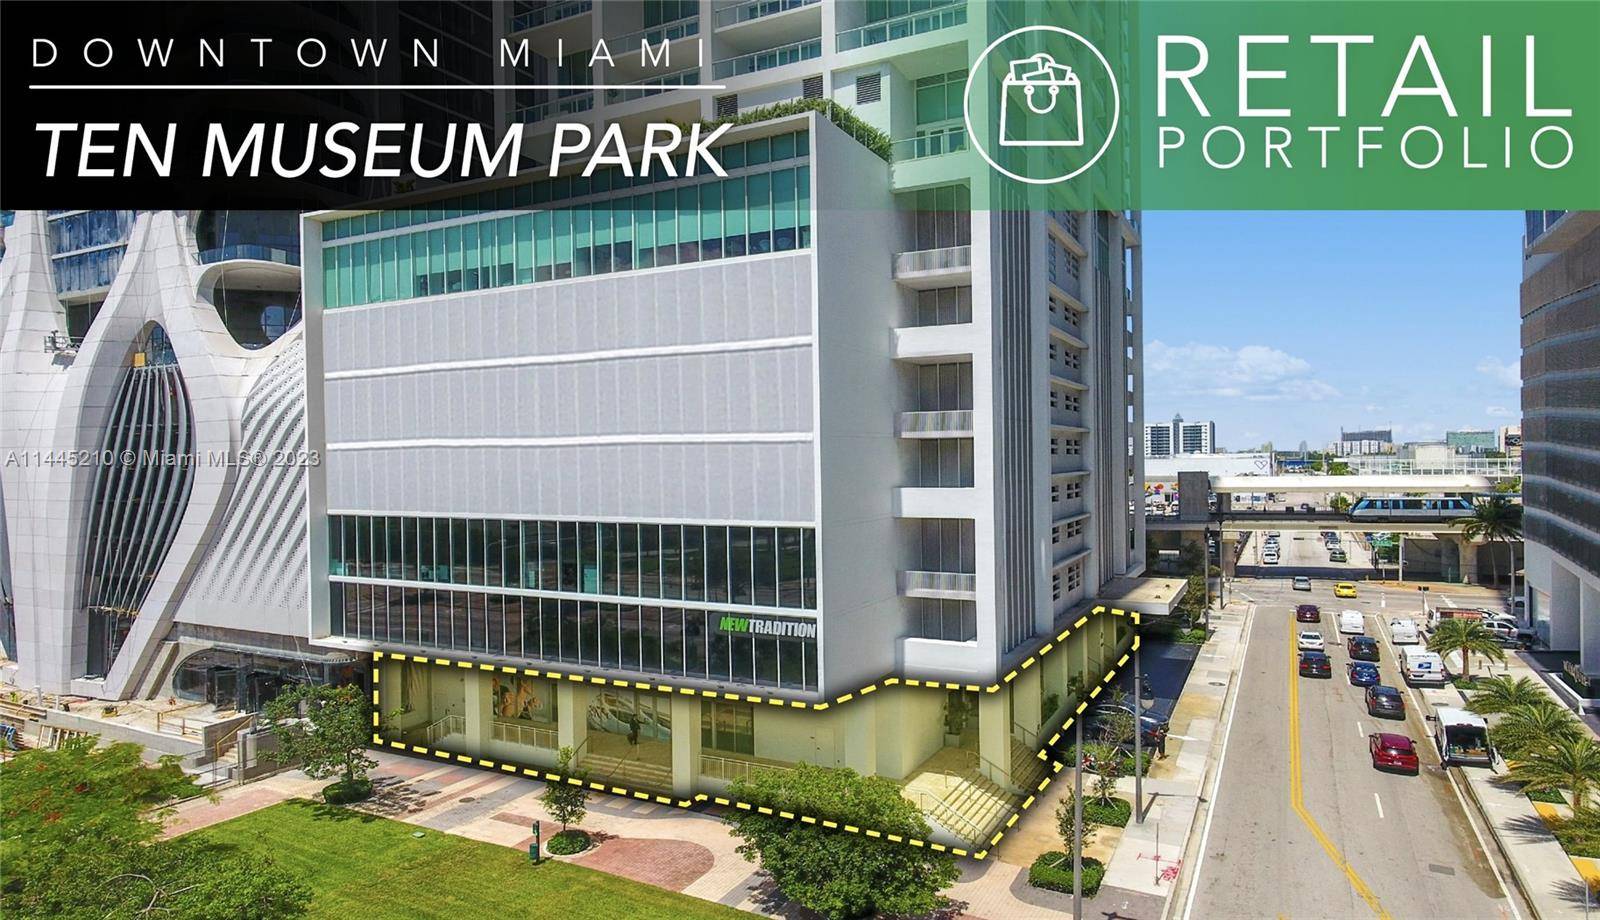 THE OFFERING Chariff Realty Group is pleased to offer an unprecedented opportunity to acquire the ground floor retail spaces at Ten Museum Park, Miami s newest and most exciting mixed ...